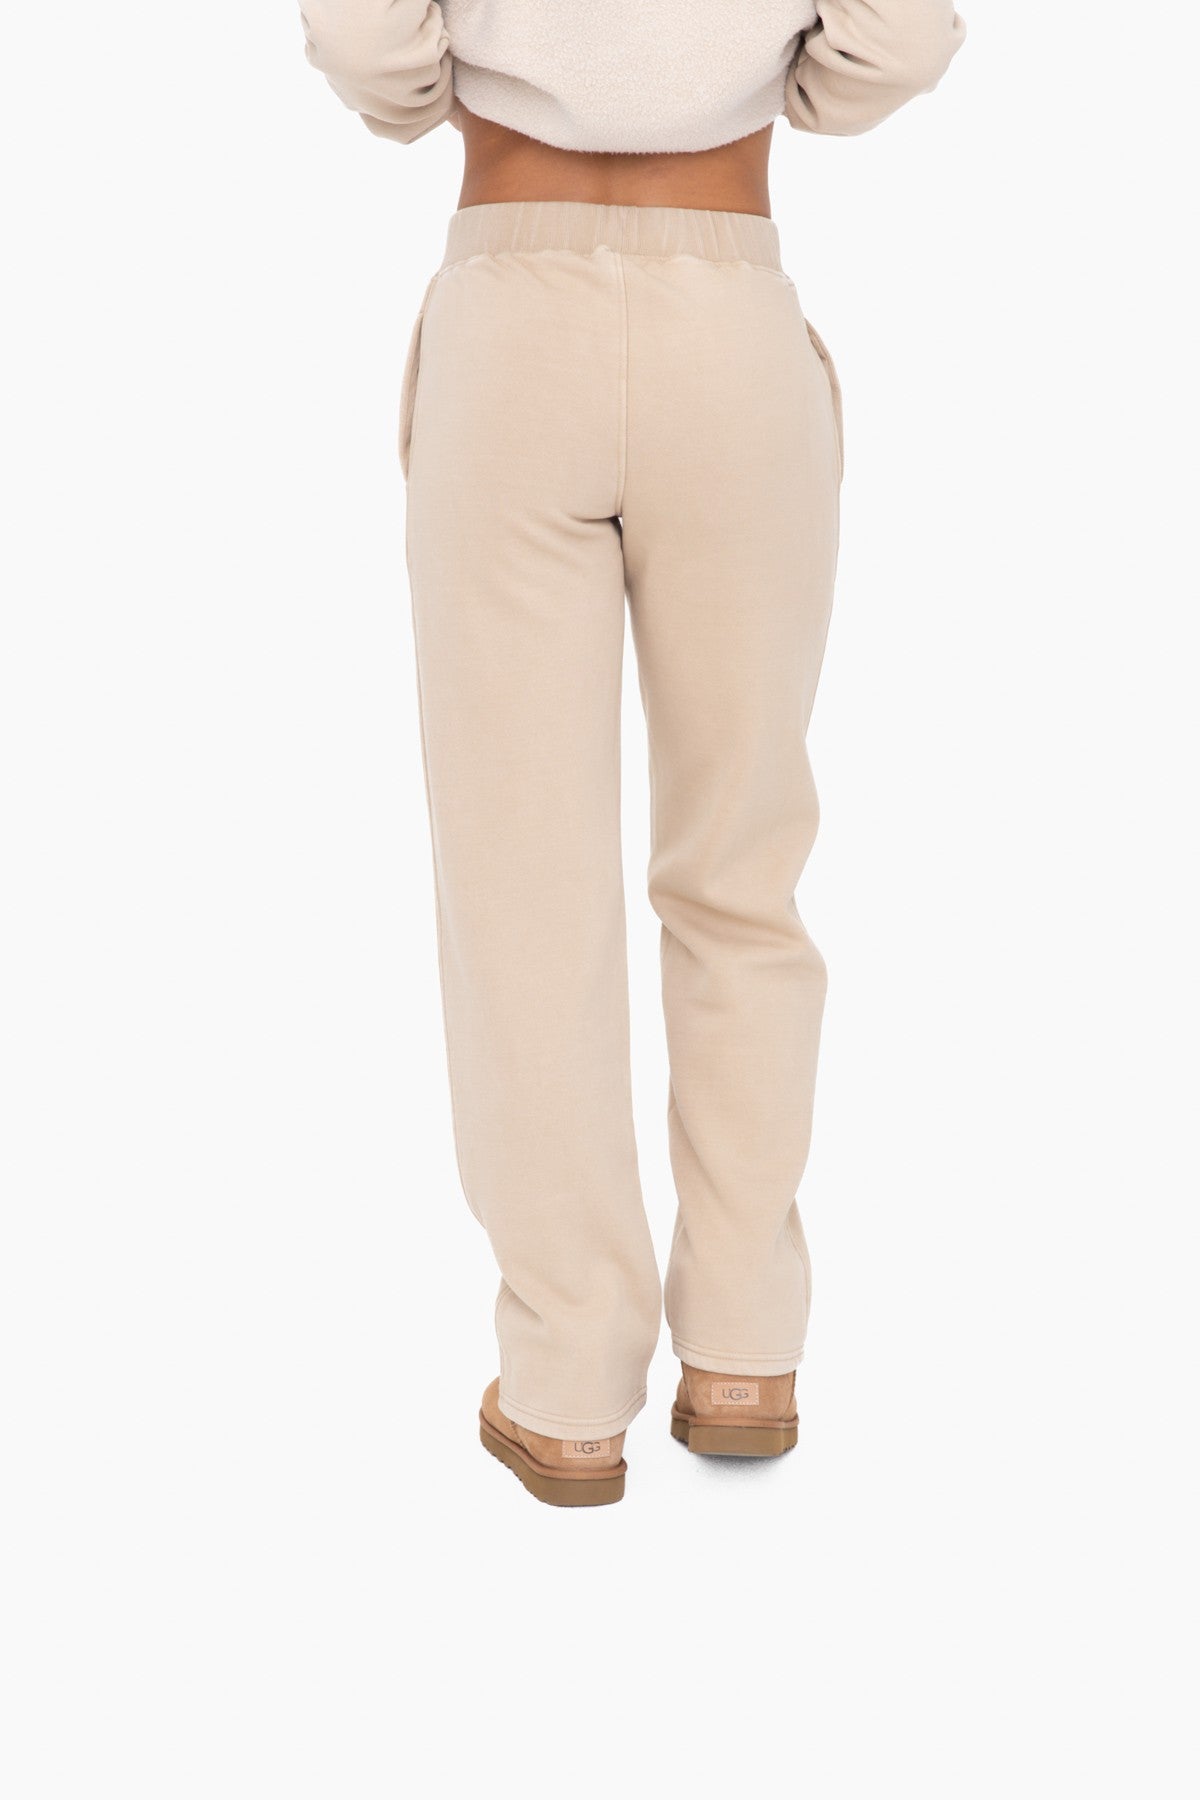 Vintage Lounge Pants in Taupe